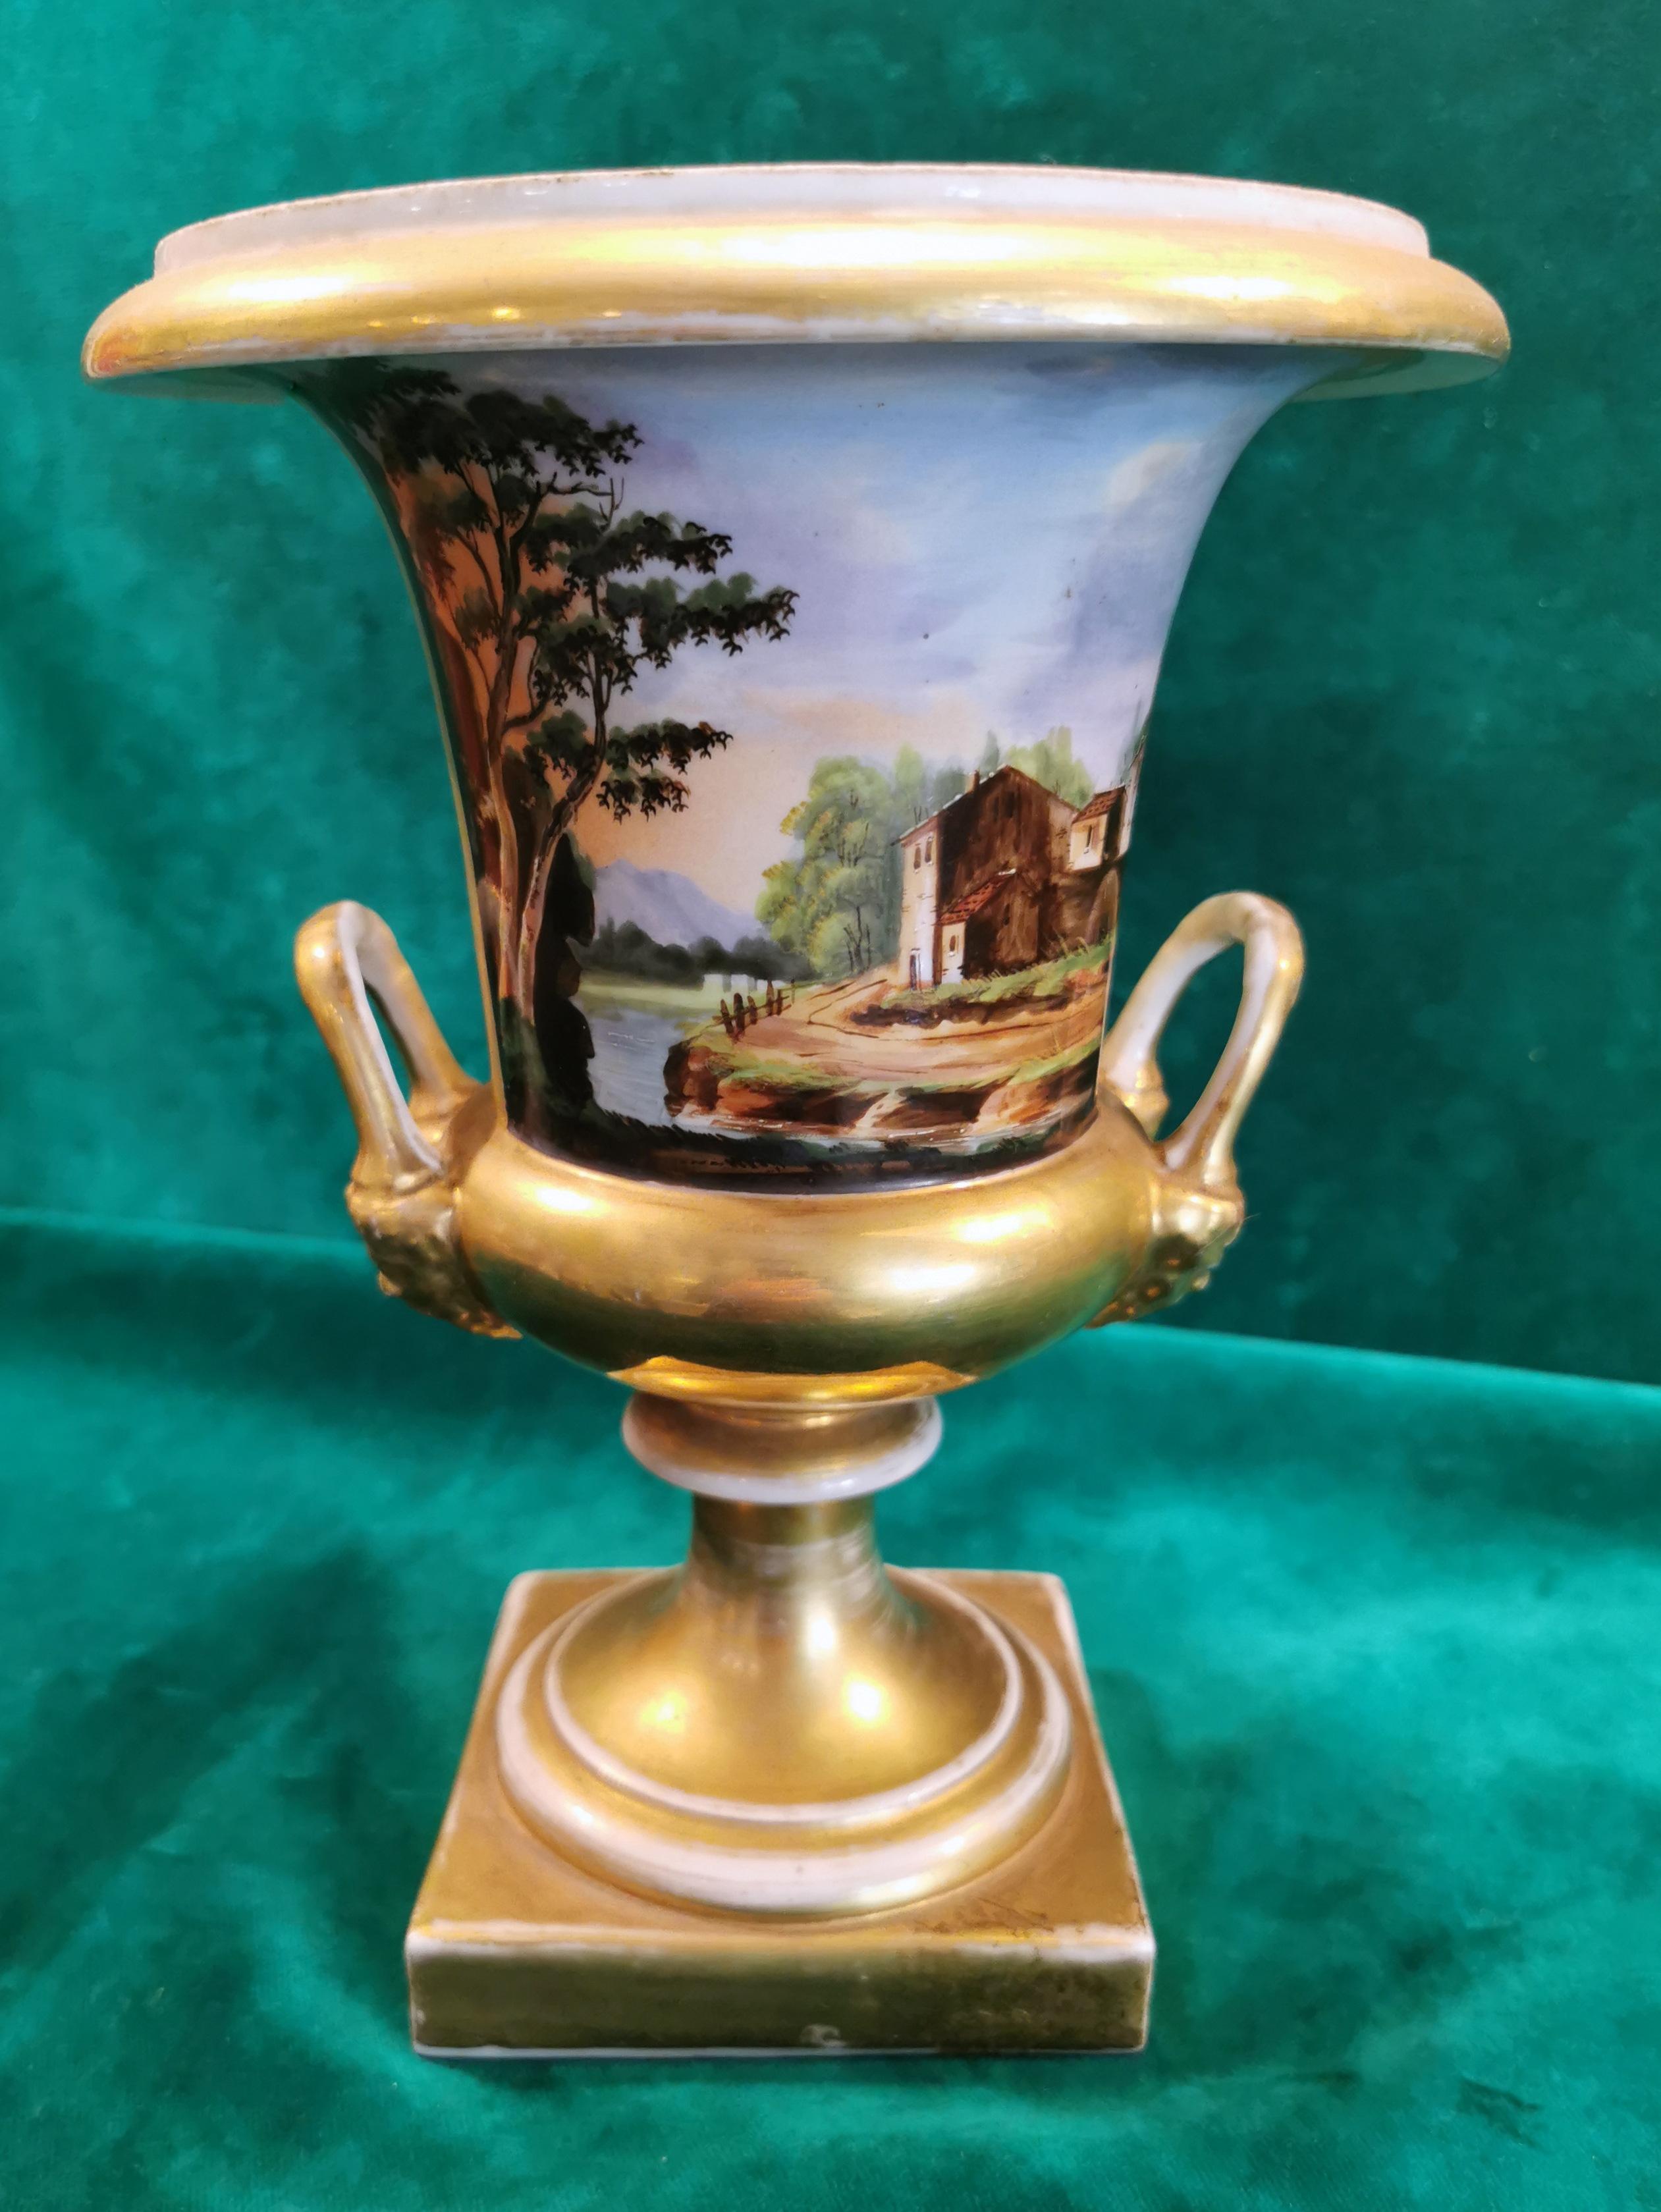 We kindly suggest you read the whole description, because with it we try to give you detailed technical and historical information to guarantee the authenticity of our objects.
Iconic and historic Medici vase with a square base; it was made in